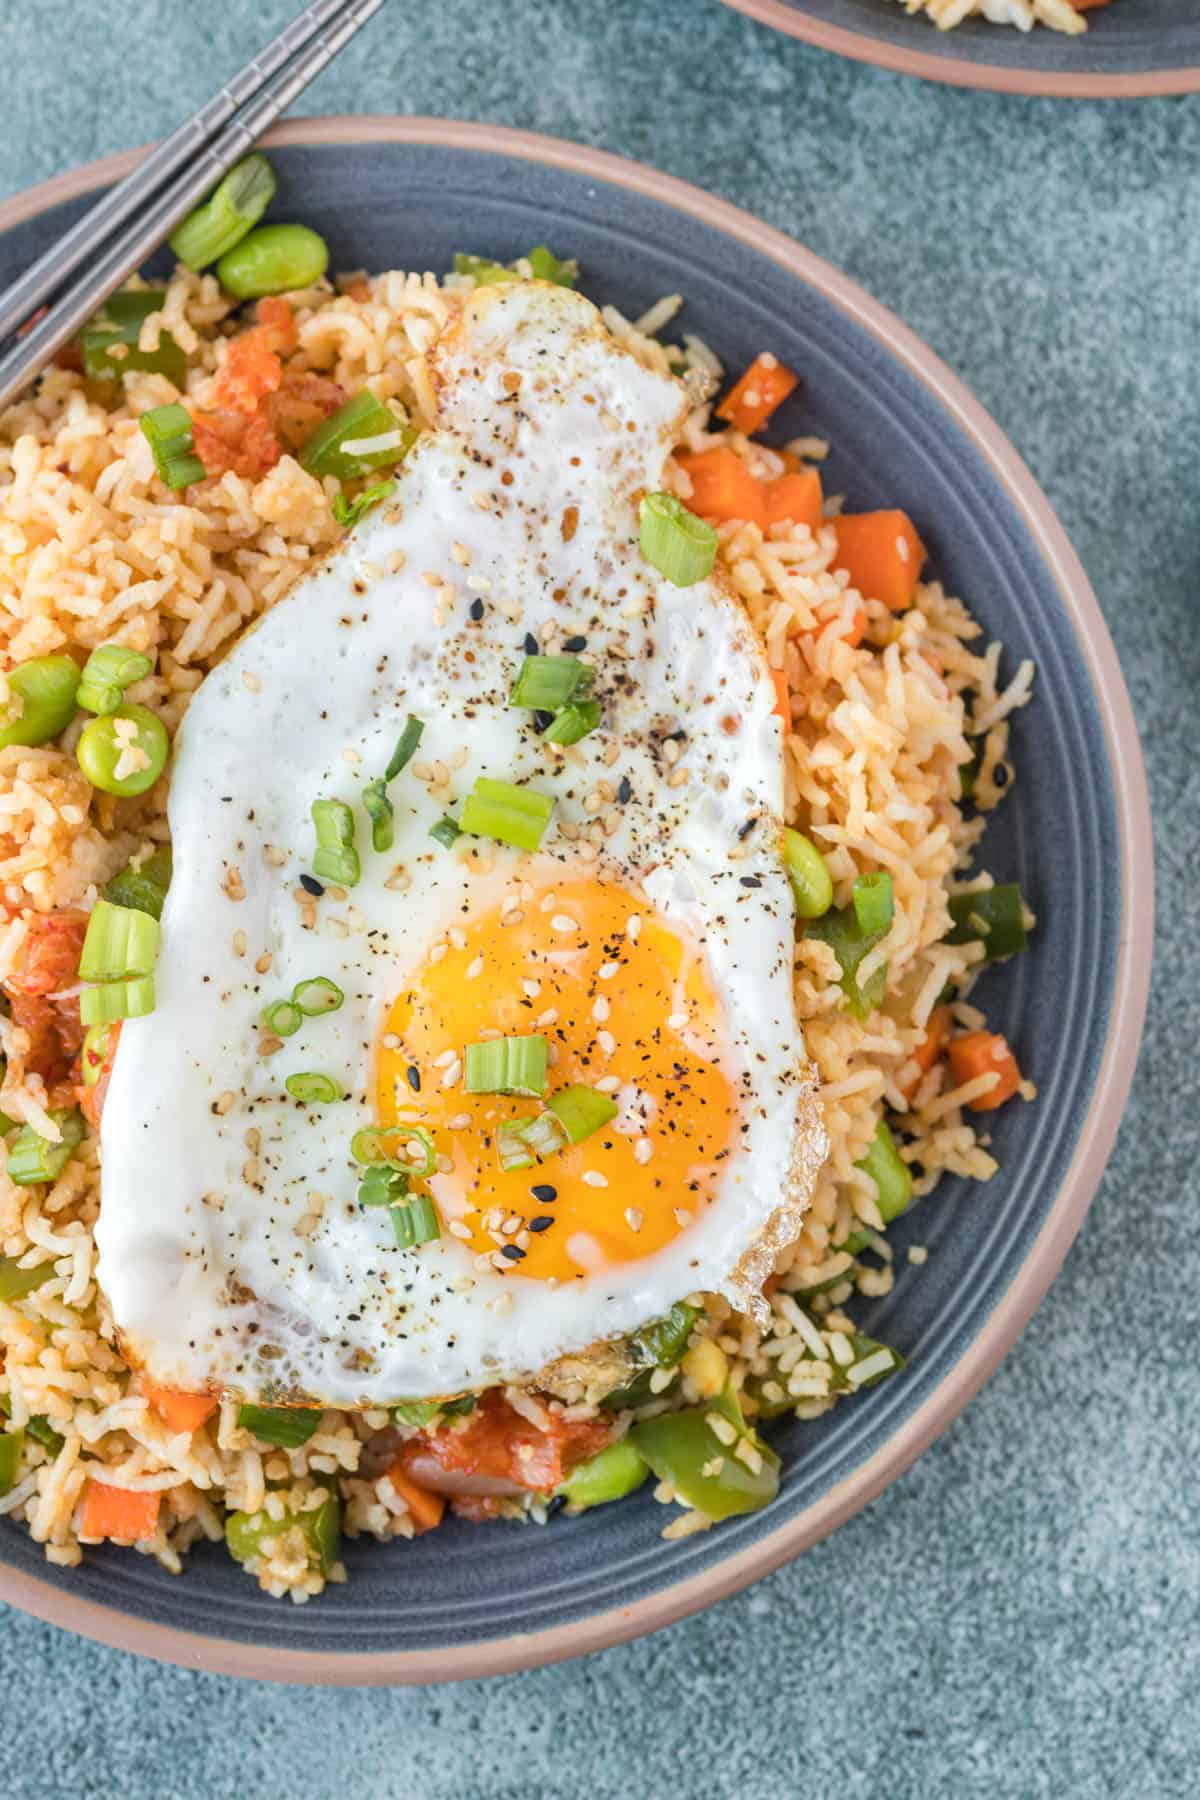 A fried egg is placed on top of a serving of kimchi fried rice.